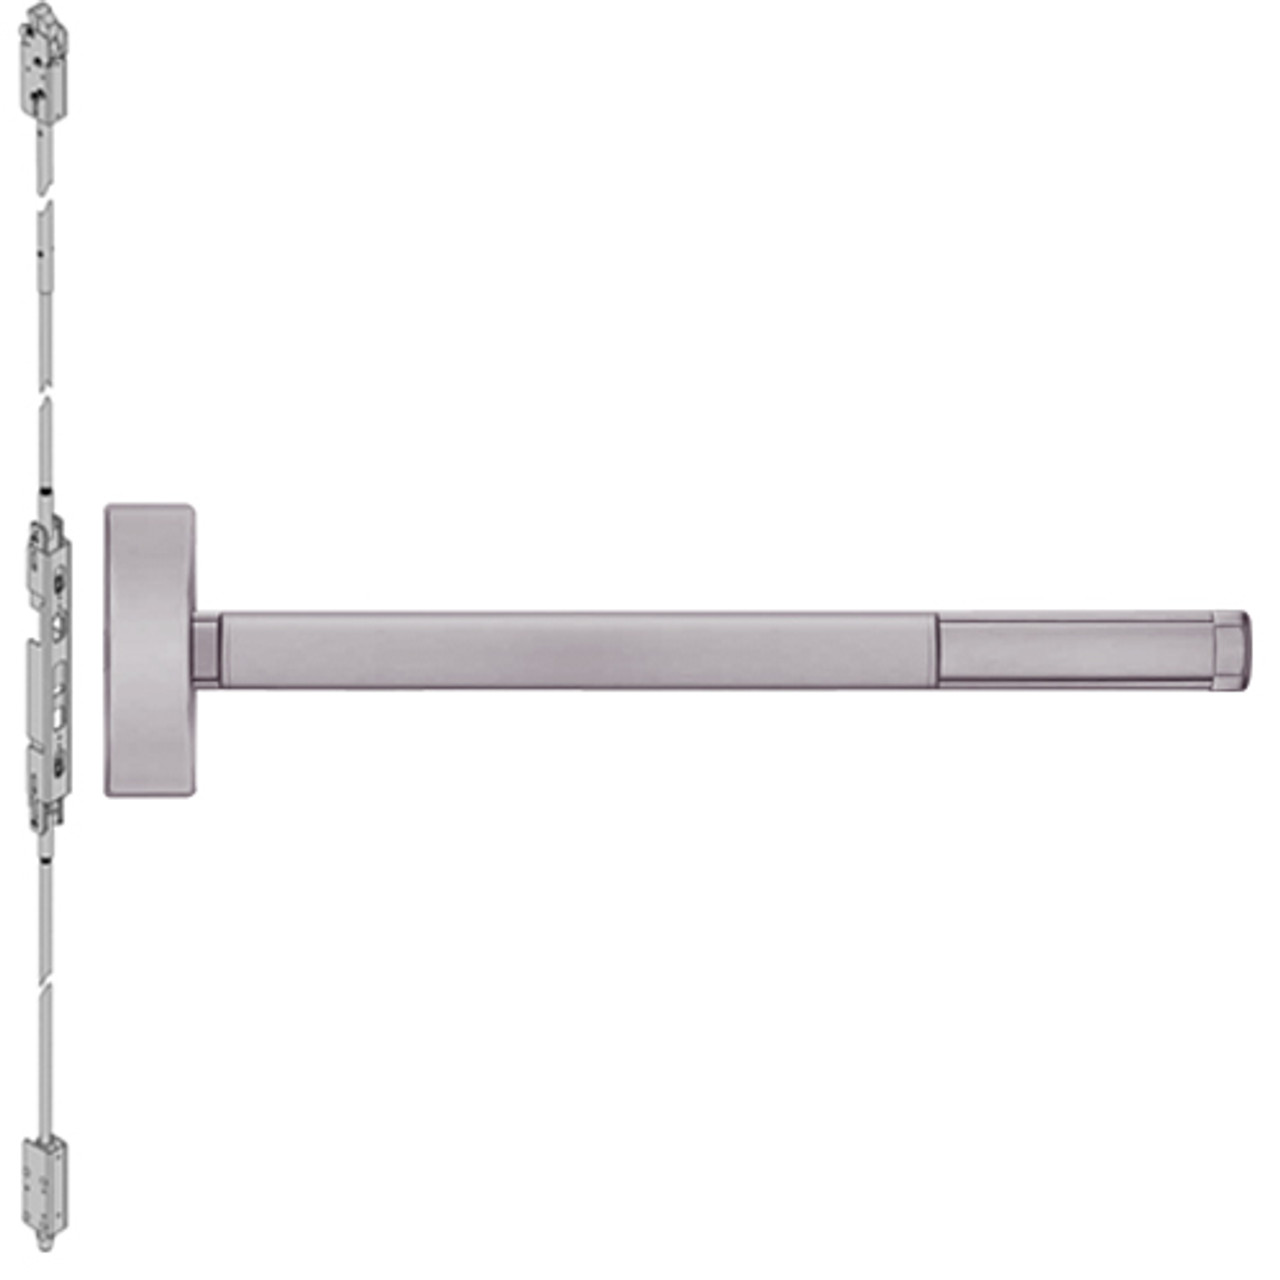 ELRFL2805-630-48 PHI 2800 Series Fire Rated Concealed Vertical Rod Exit Device with Electric Latch Retraction Prepped for Key Controls Thumb Piece in Satin Stainless Steel Finish